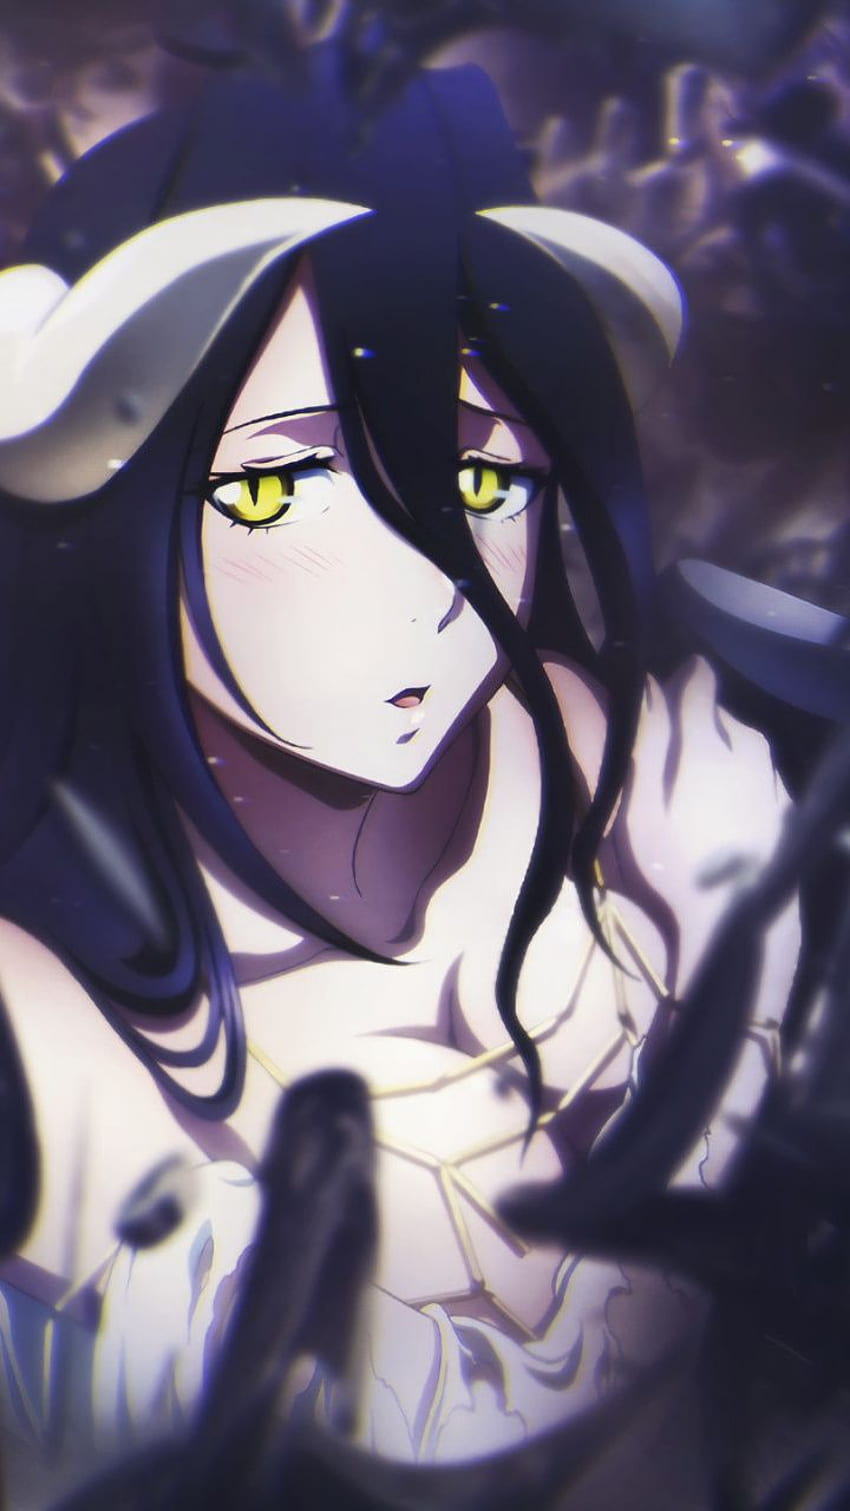 HD wallpaper Anime Overlord Albedo Overlord  Wallpaper Flare